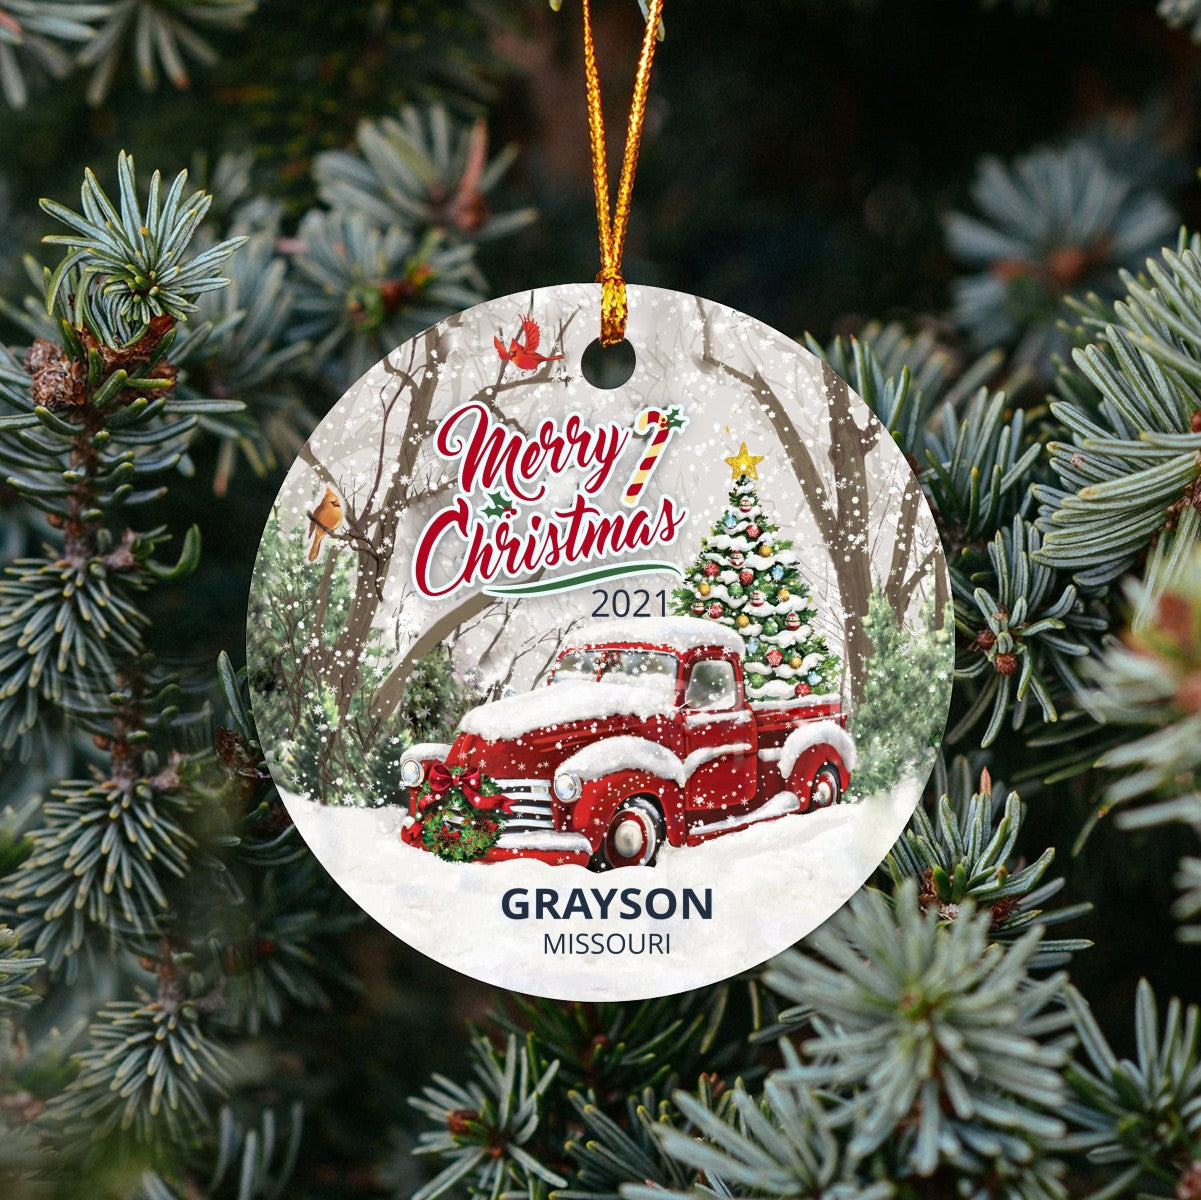 Christmas Tree Ornaments Grayson - Ornament With Name City, State Grayson Missouri MO Ornament - Red Truck Xmas Ornaments 3'' Plastic Gift For Family, Friend And Housewarming